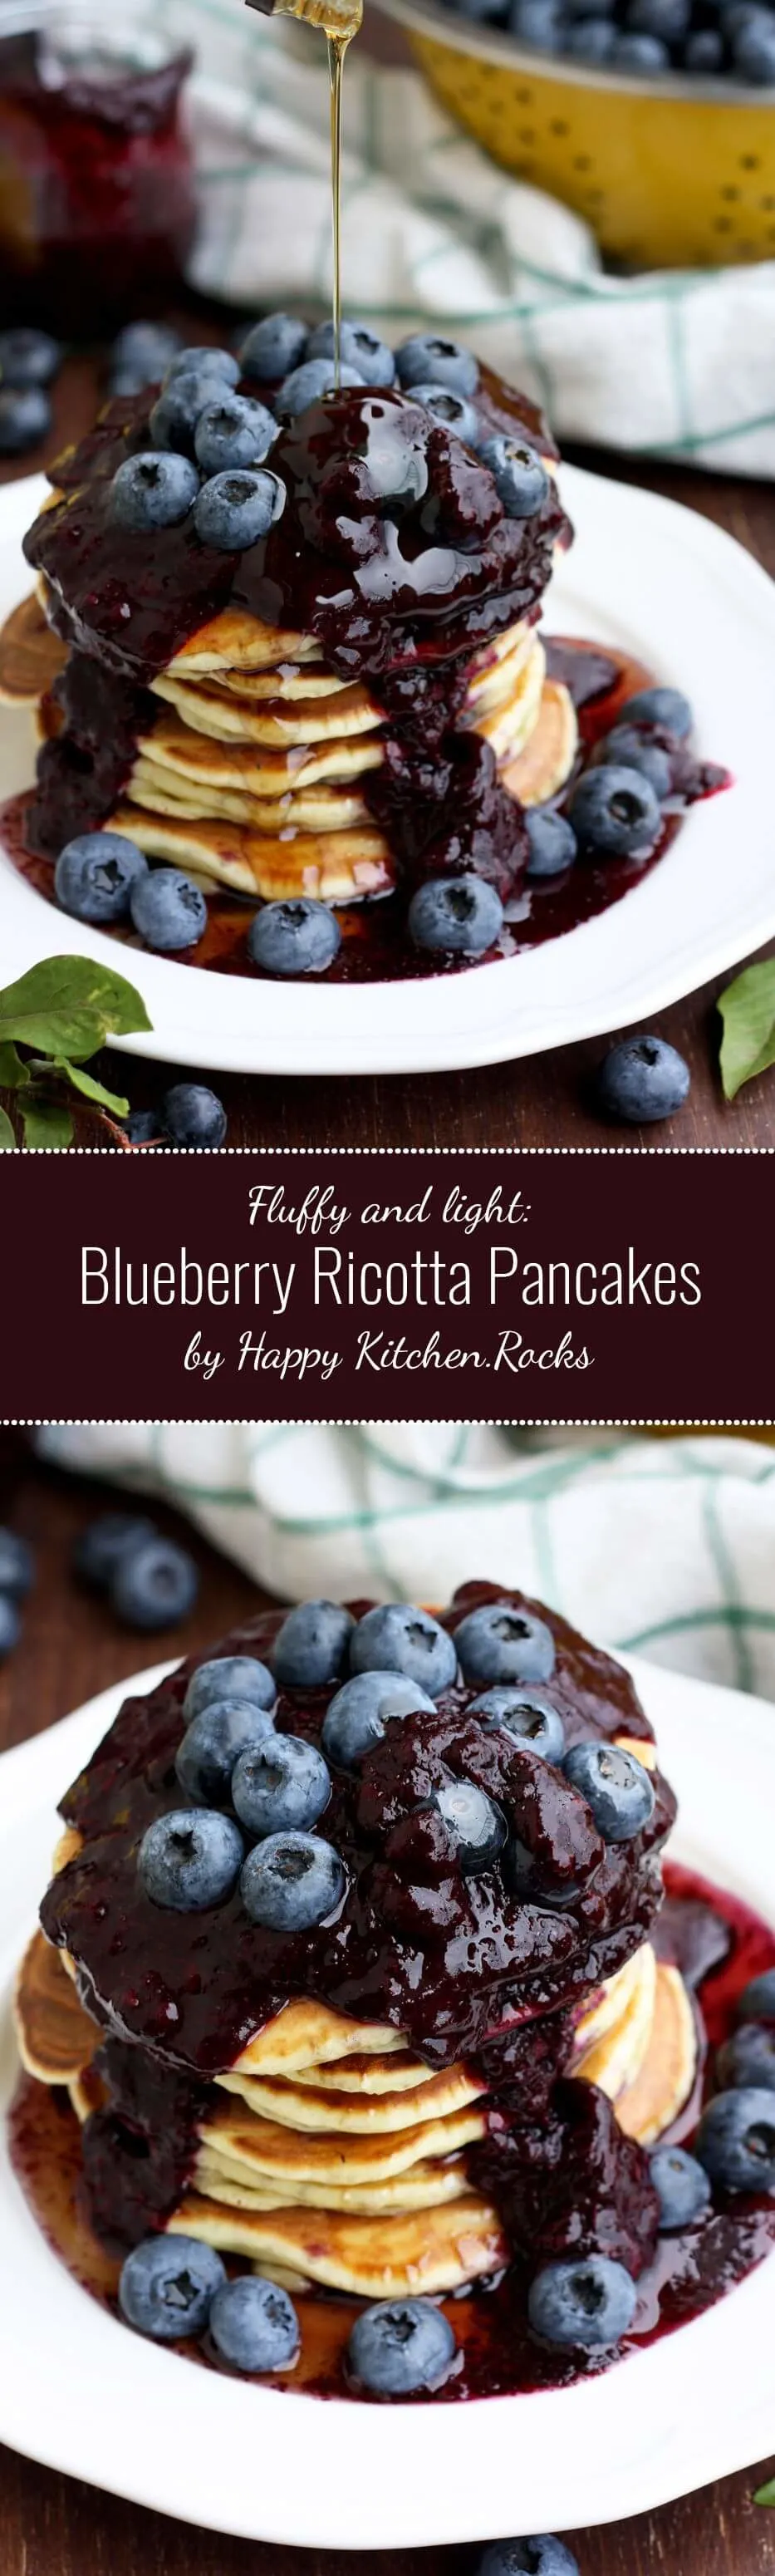 Blueberry Ricotta Pancakes Super Long Collage of Two Images and Text Overlay